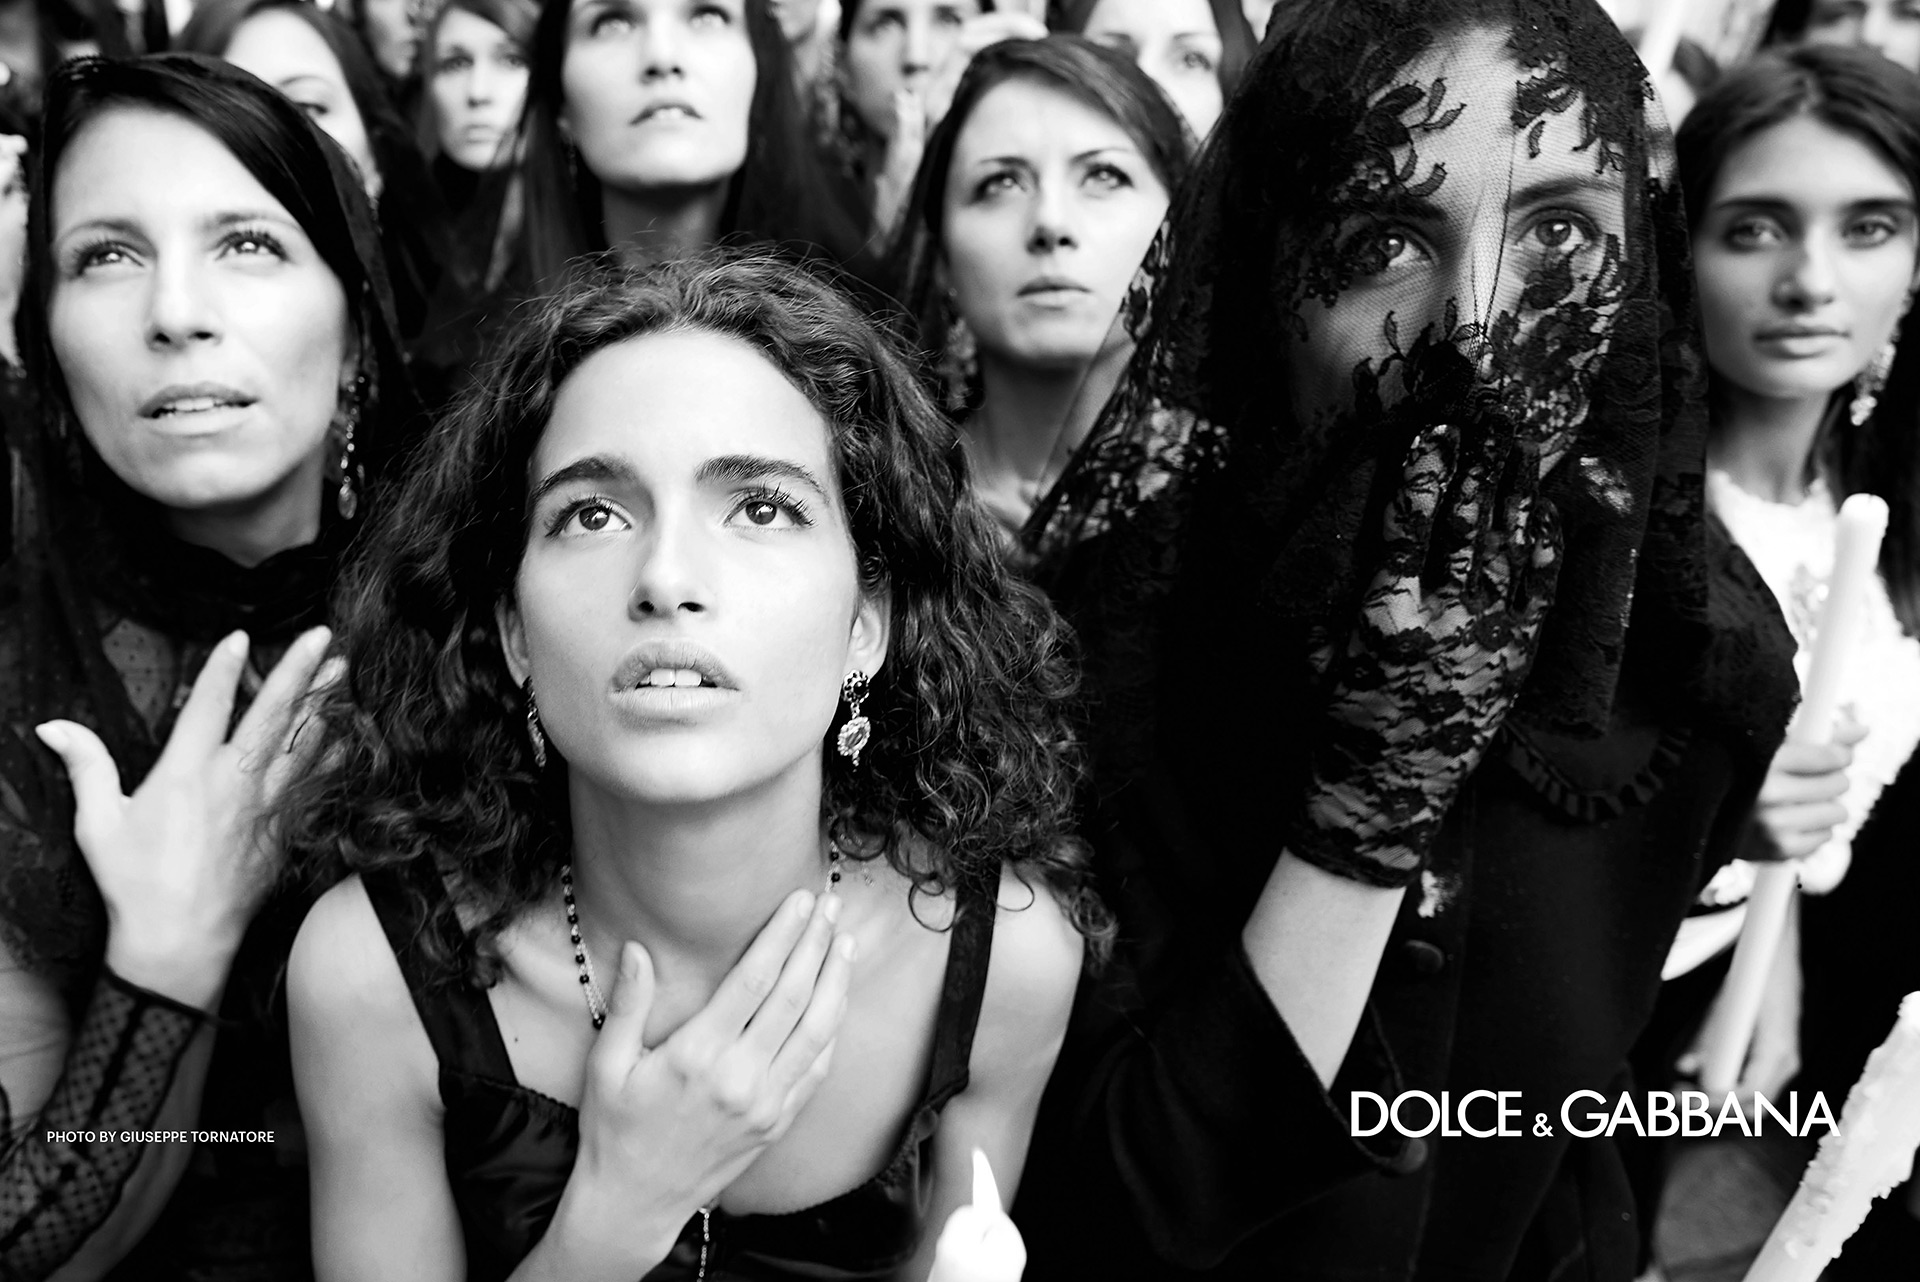 dolce and gabbana commercial 2019